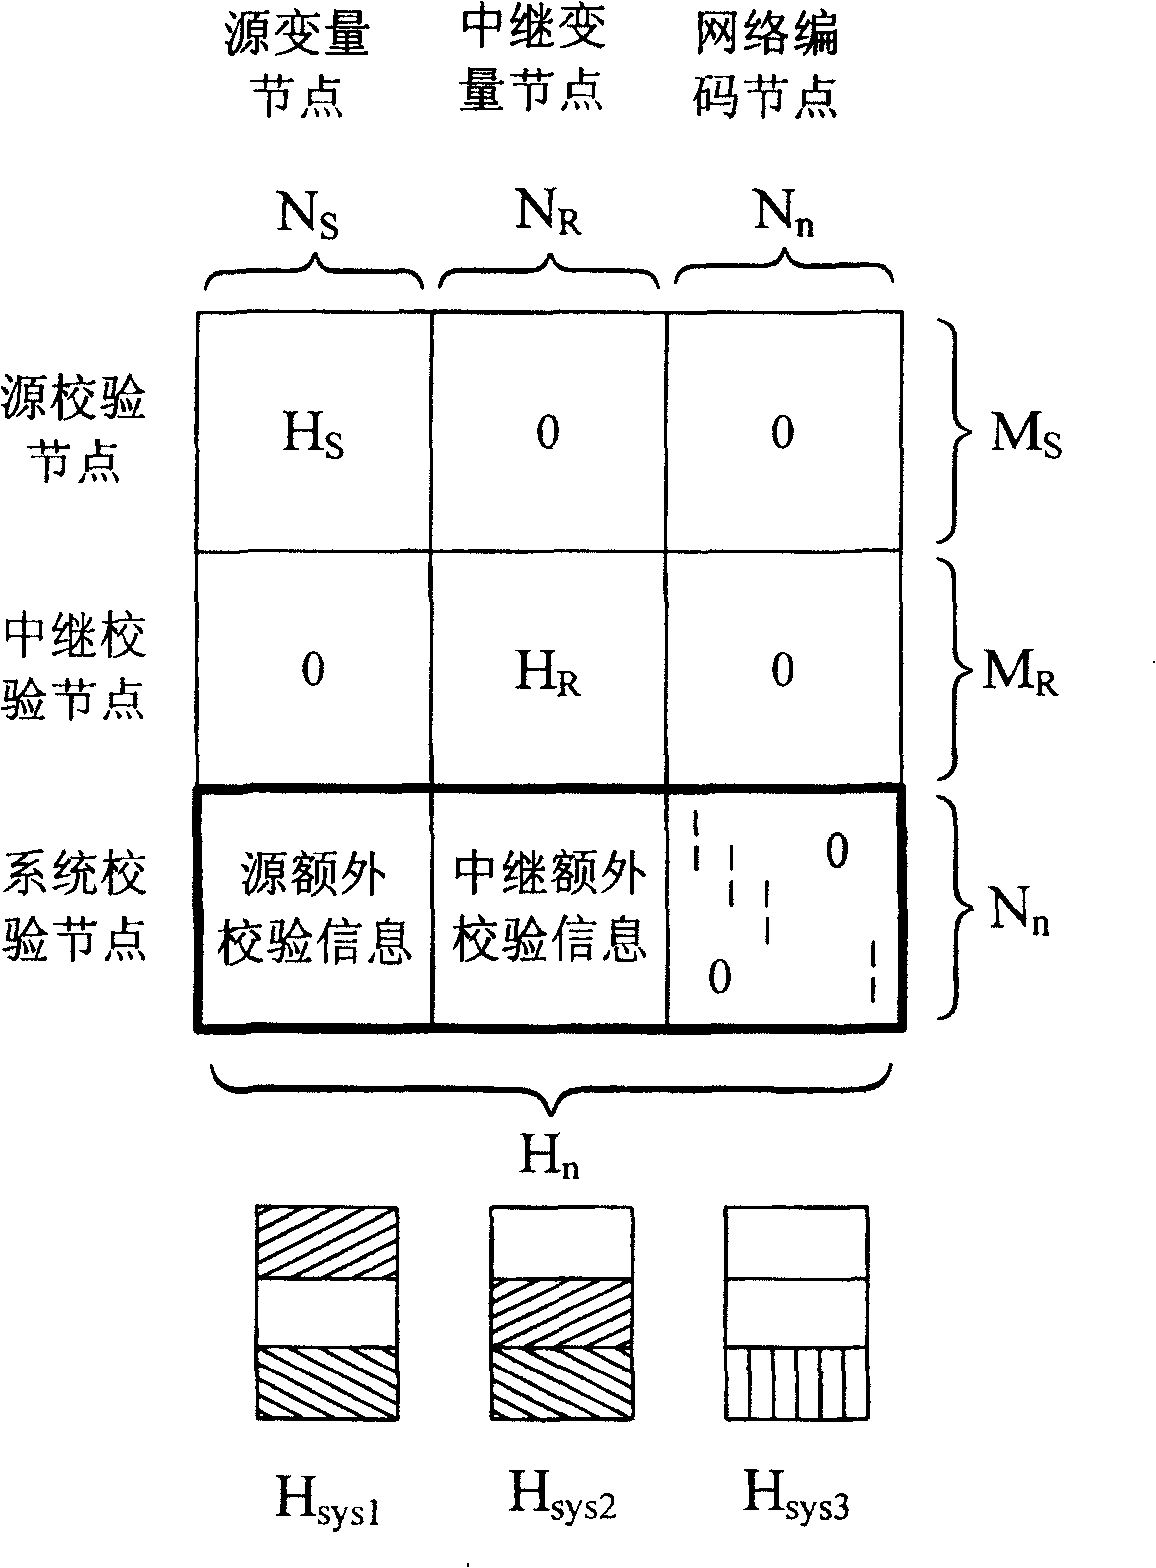 Cooperation transmission method based on joint network channel code